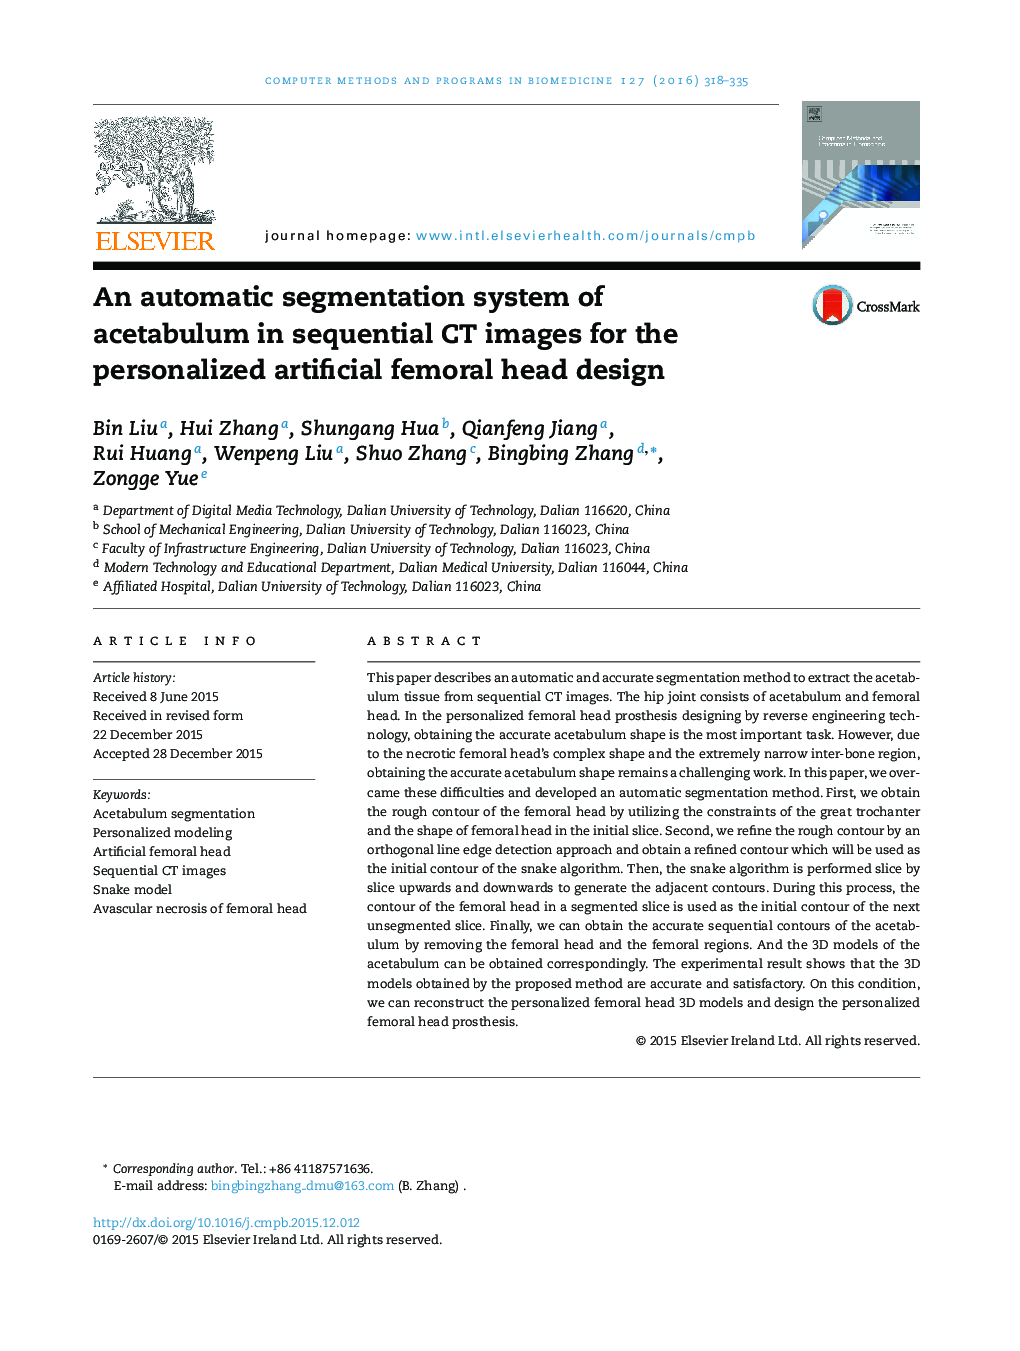 An automatic segmentation system of acetabulum in sequential CT images for the personalized artificial femoral head design